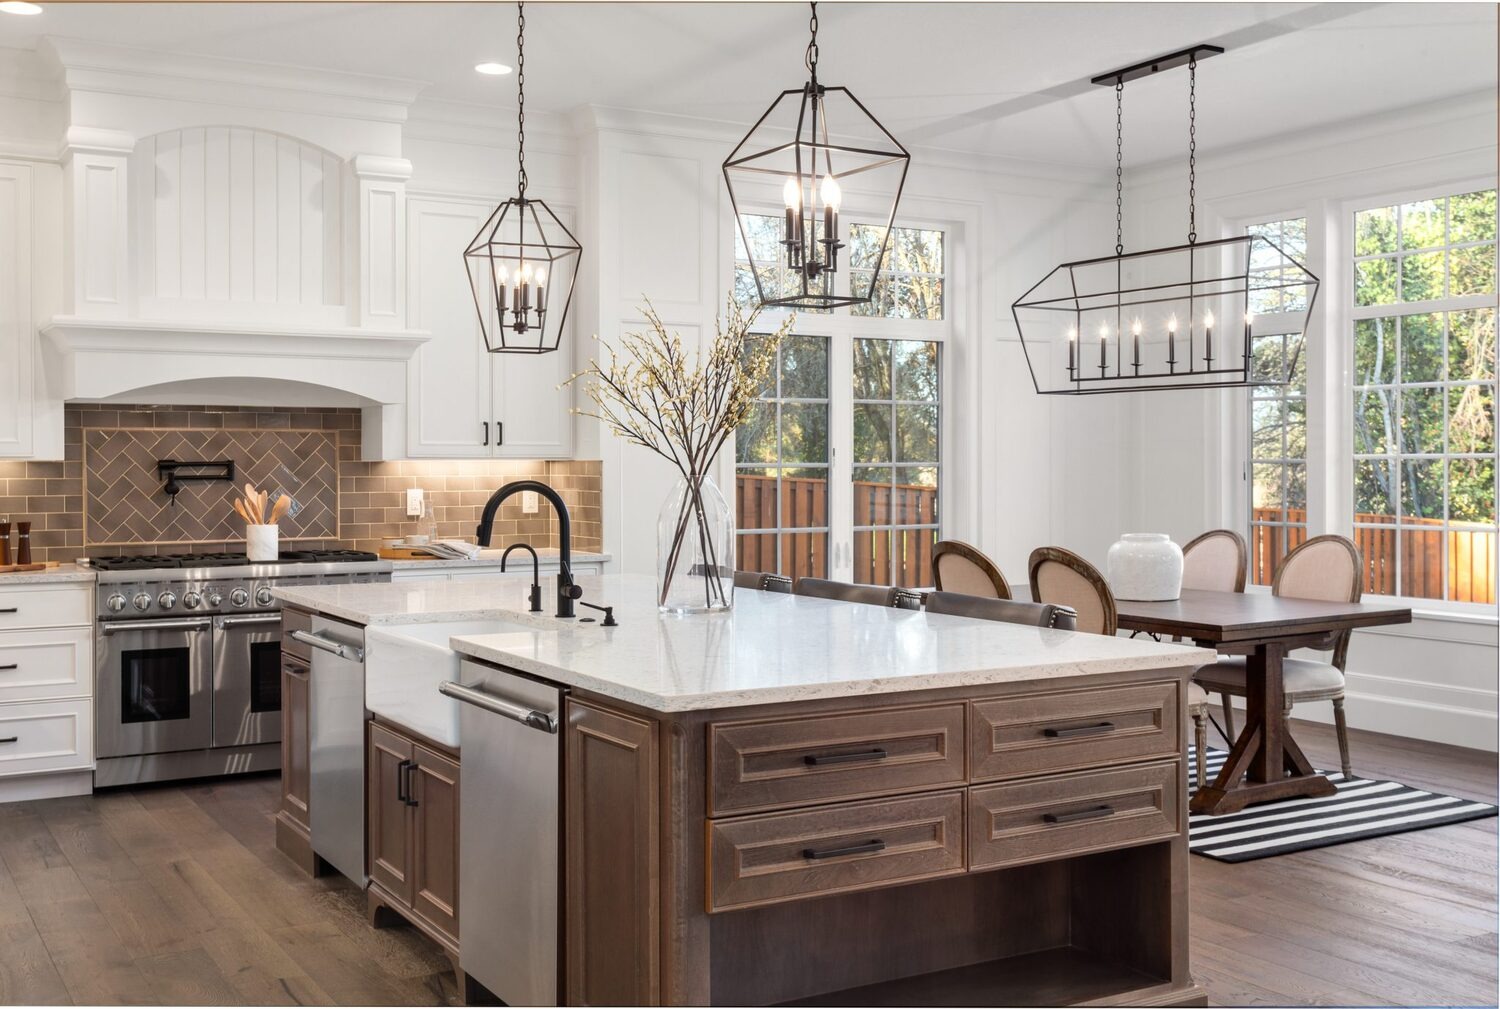 The kitchen remodeling Golf project created a warm traditional kitchen with white and brown wooden accents